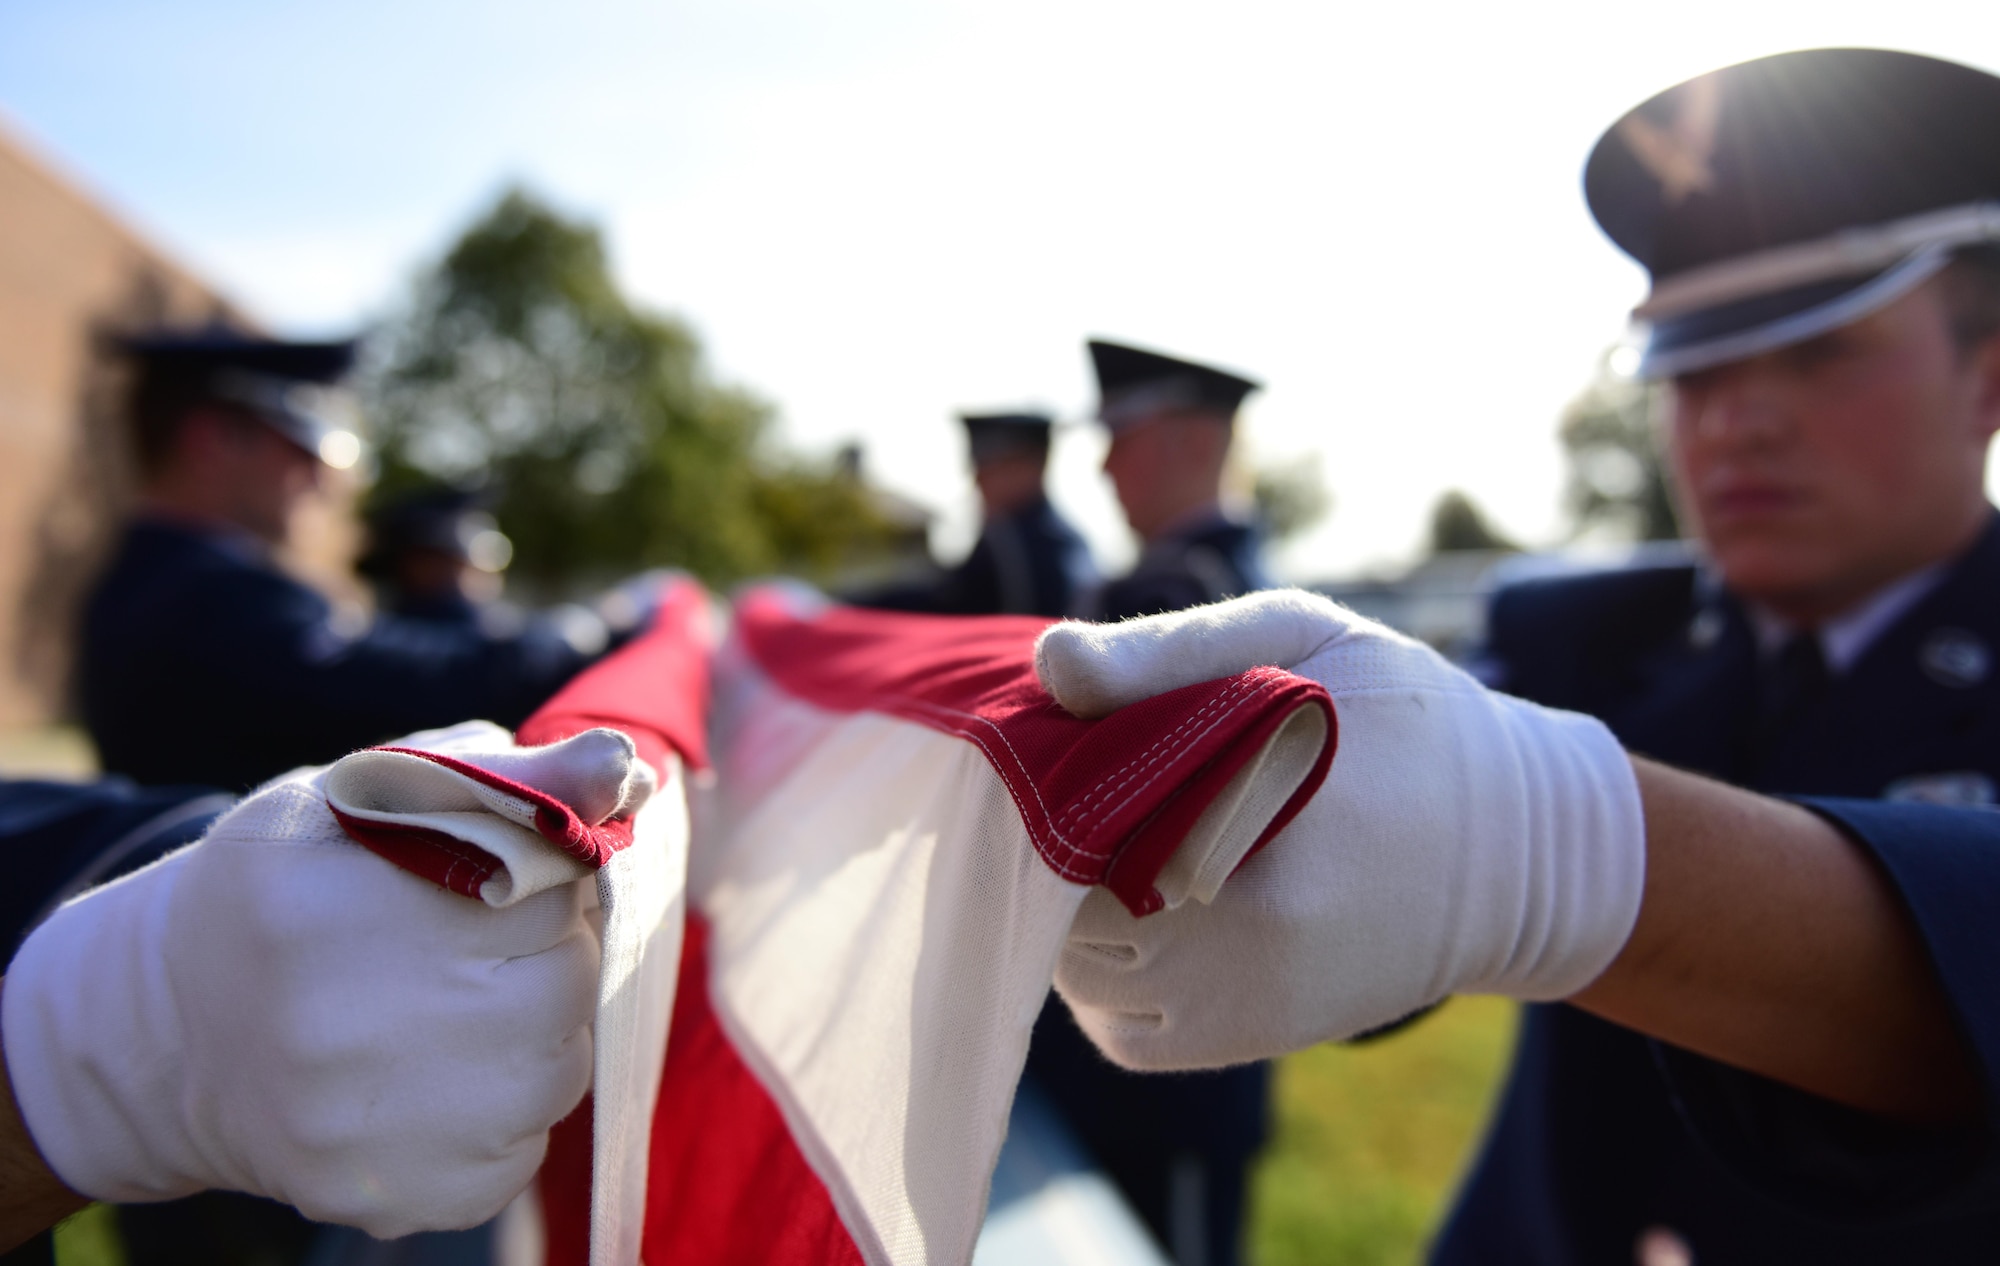 Members of the Whiteman Air Force Base Honor Guard hold an American flag at the “canoe” position during a simulated funeral at Whiteman Air Force Base, Mo., Nov. 2, 2016. Made up of members from different units throughout the base, the Whiteman Honor Guard performs funeral and military honors in support of 99 counties in Missouri and 19 counties in Kansas, covering more than 70,000 square miles, one of the biggest areas of responsibility in all of Air Force Global Strike Command. (U.S. Air Force photo by Senior Airman Joel Pfiester)